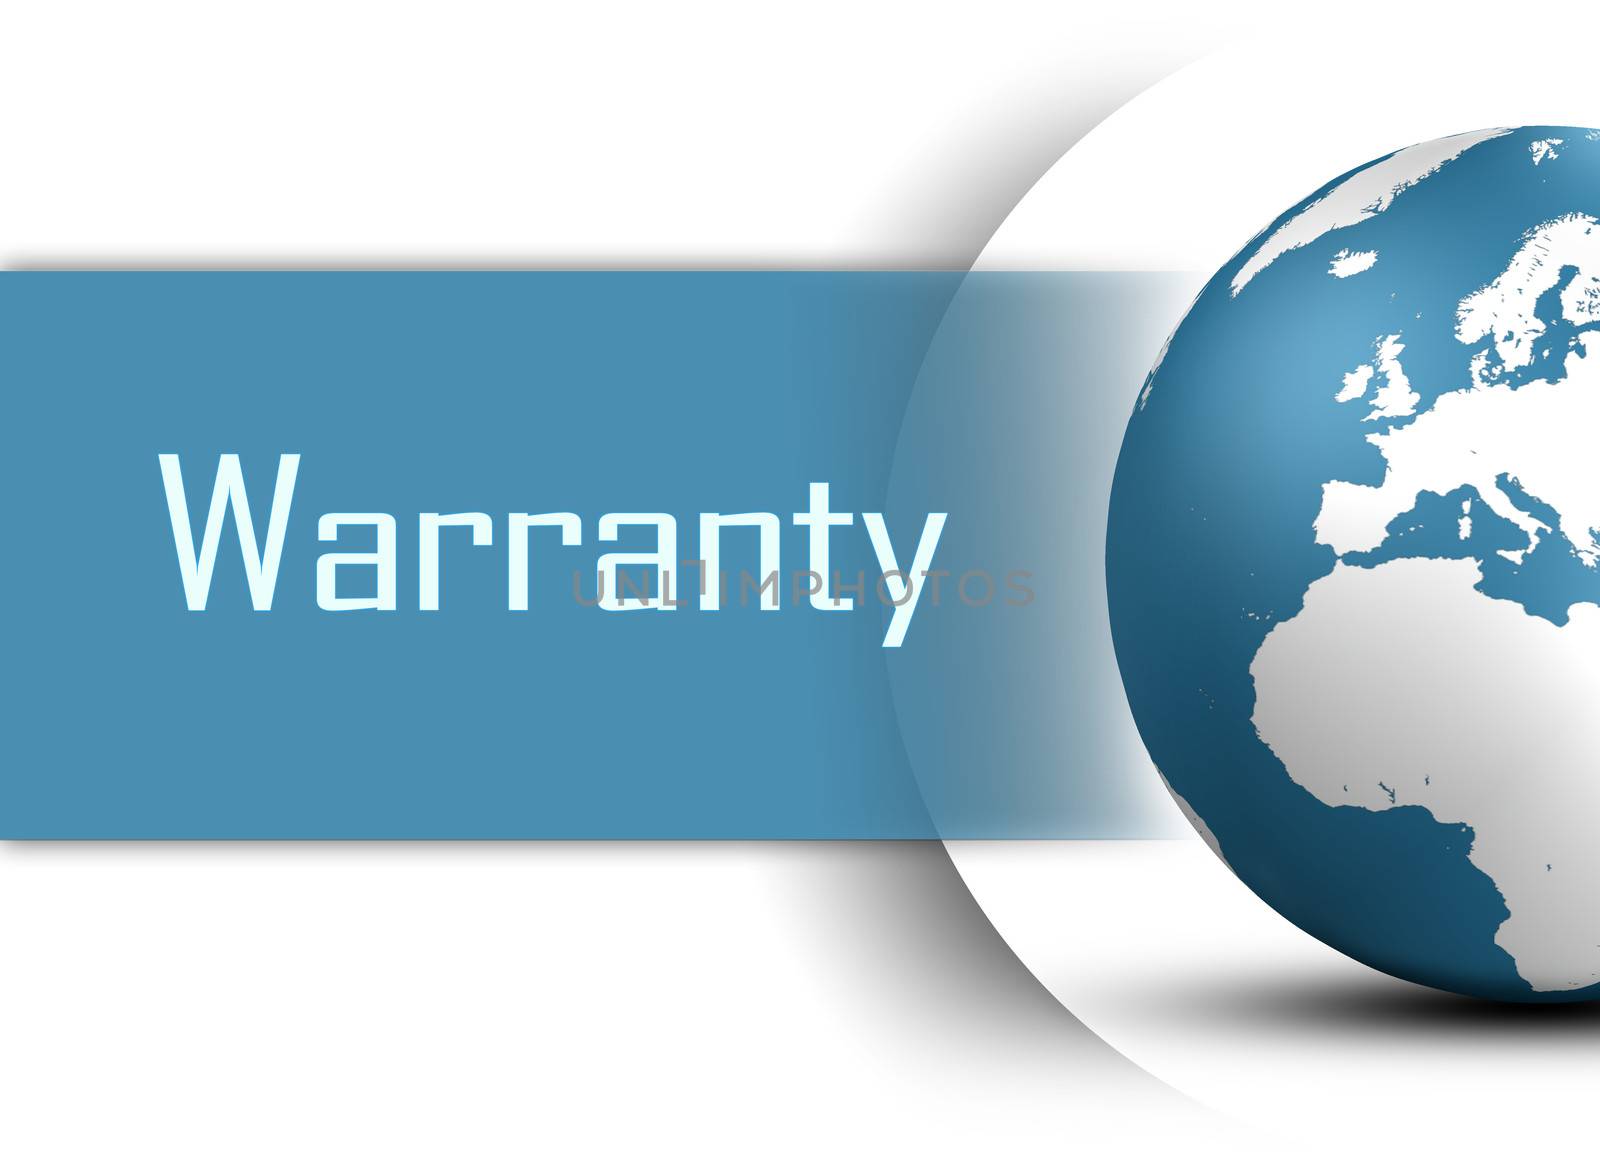 Warranty concept with globe on white background